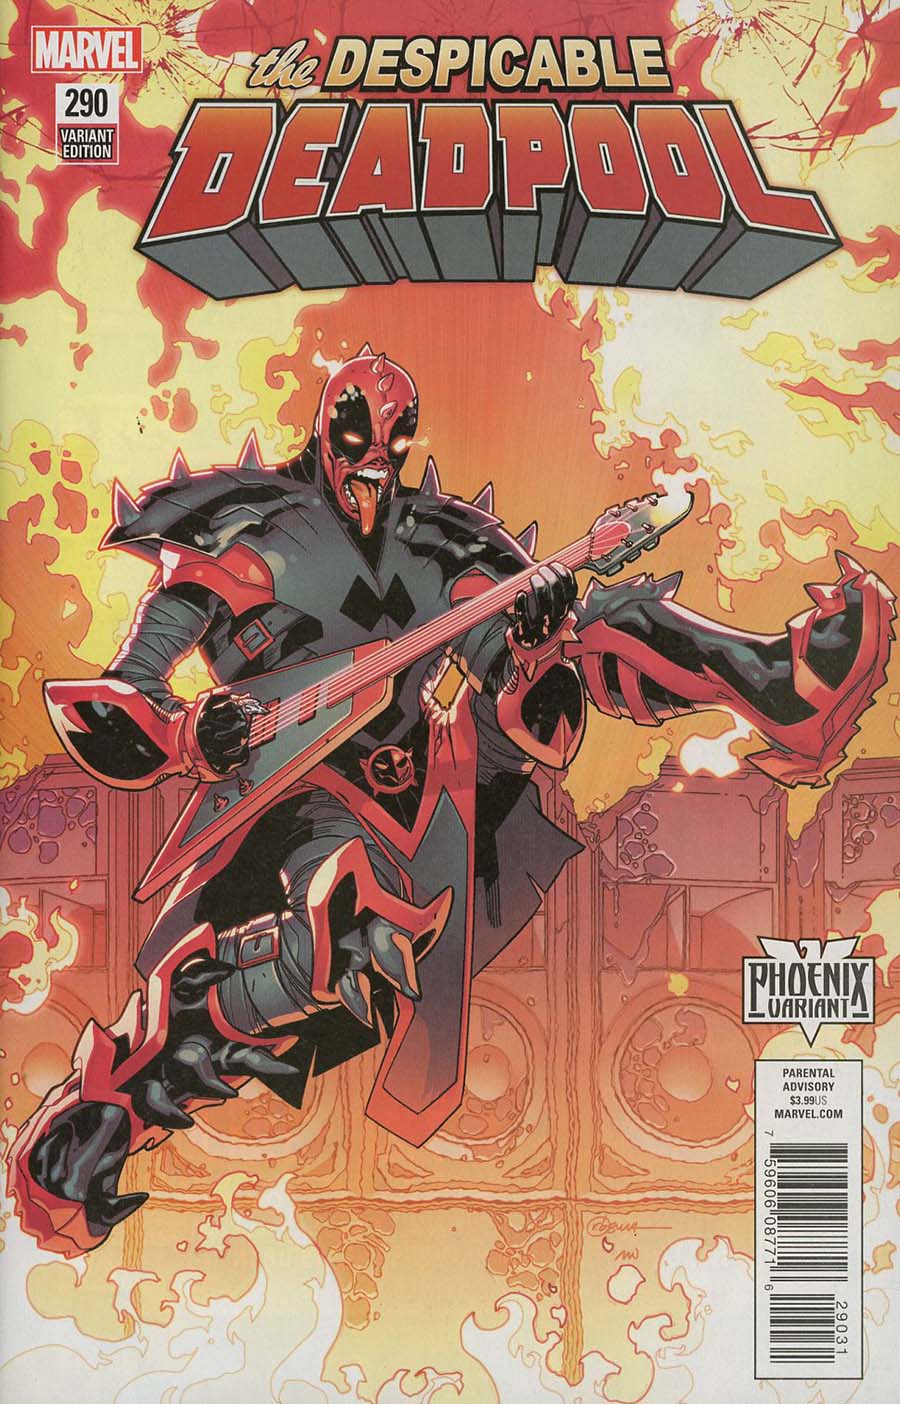 Despicable Deadpool #290 Cover B Variant RB Silva Phoenix Cover (Marvel Legacy Tie-In)